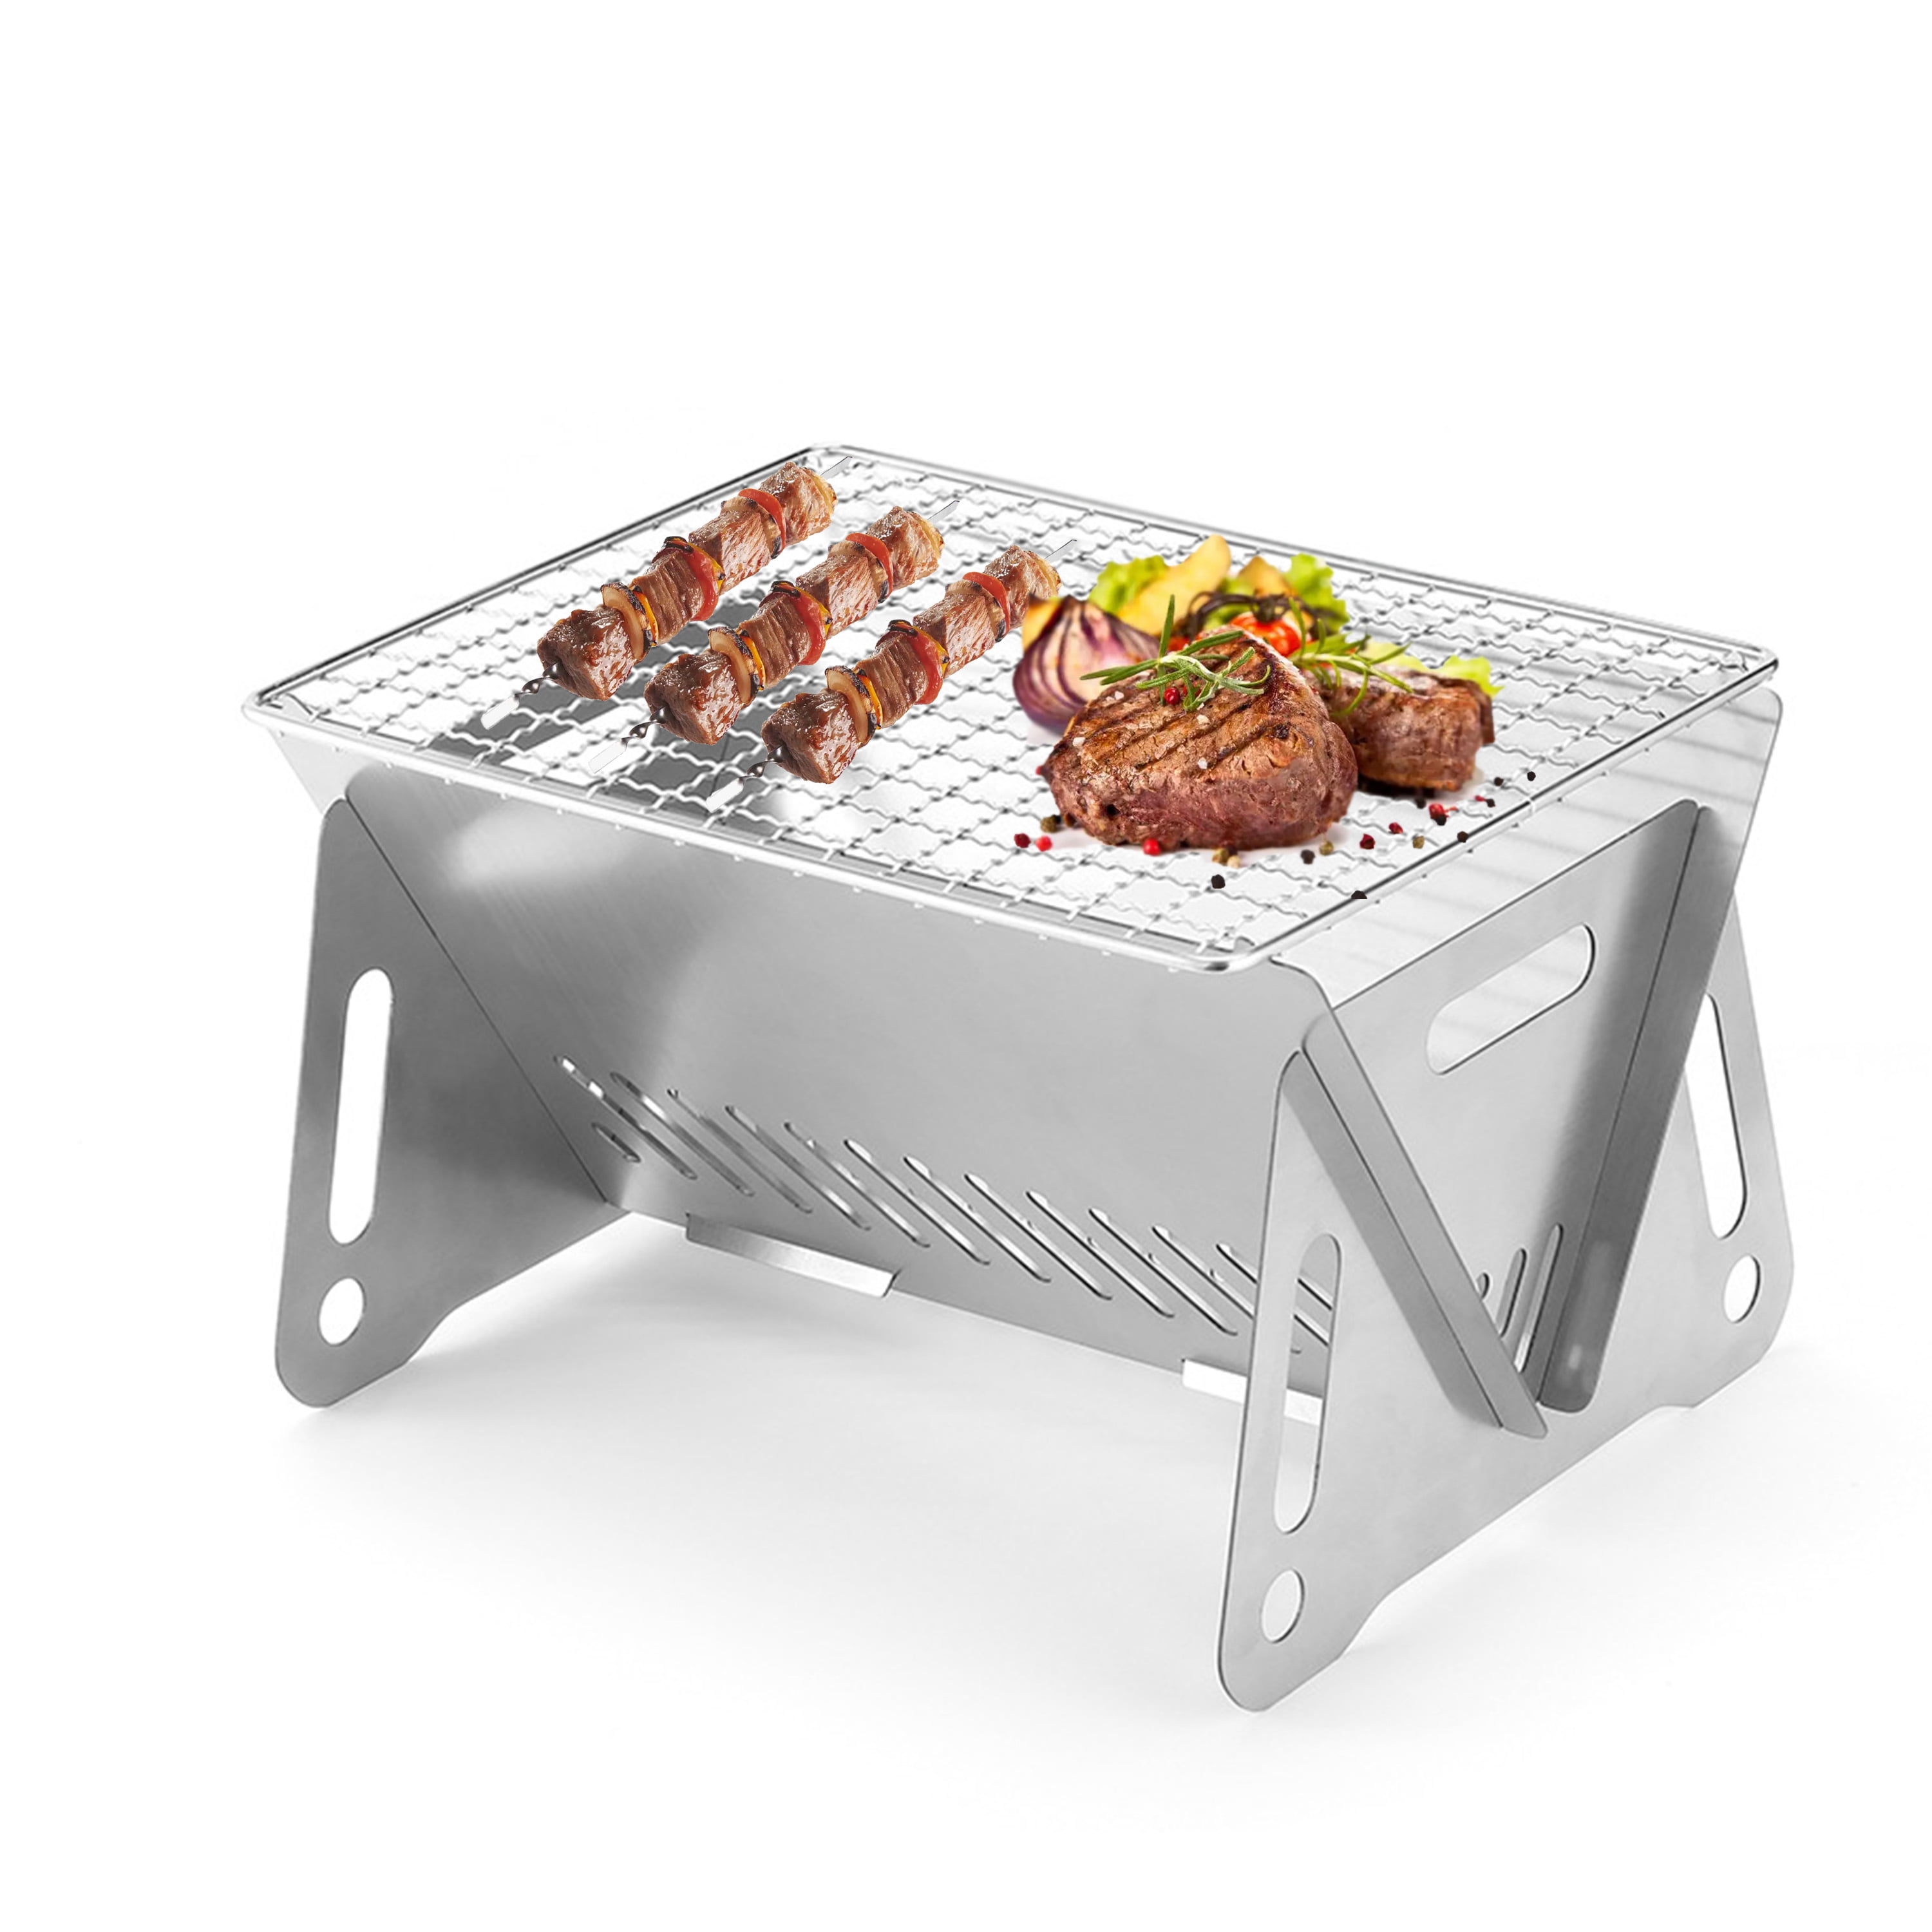 304 Stainlesses Steel Grate Barbeque Grill Folding Campfire Grill for Backpacking Hiking Survival Portable Camping Grill with Legs for Picnics 